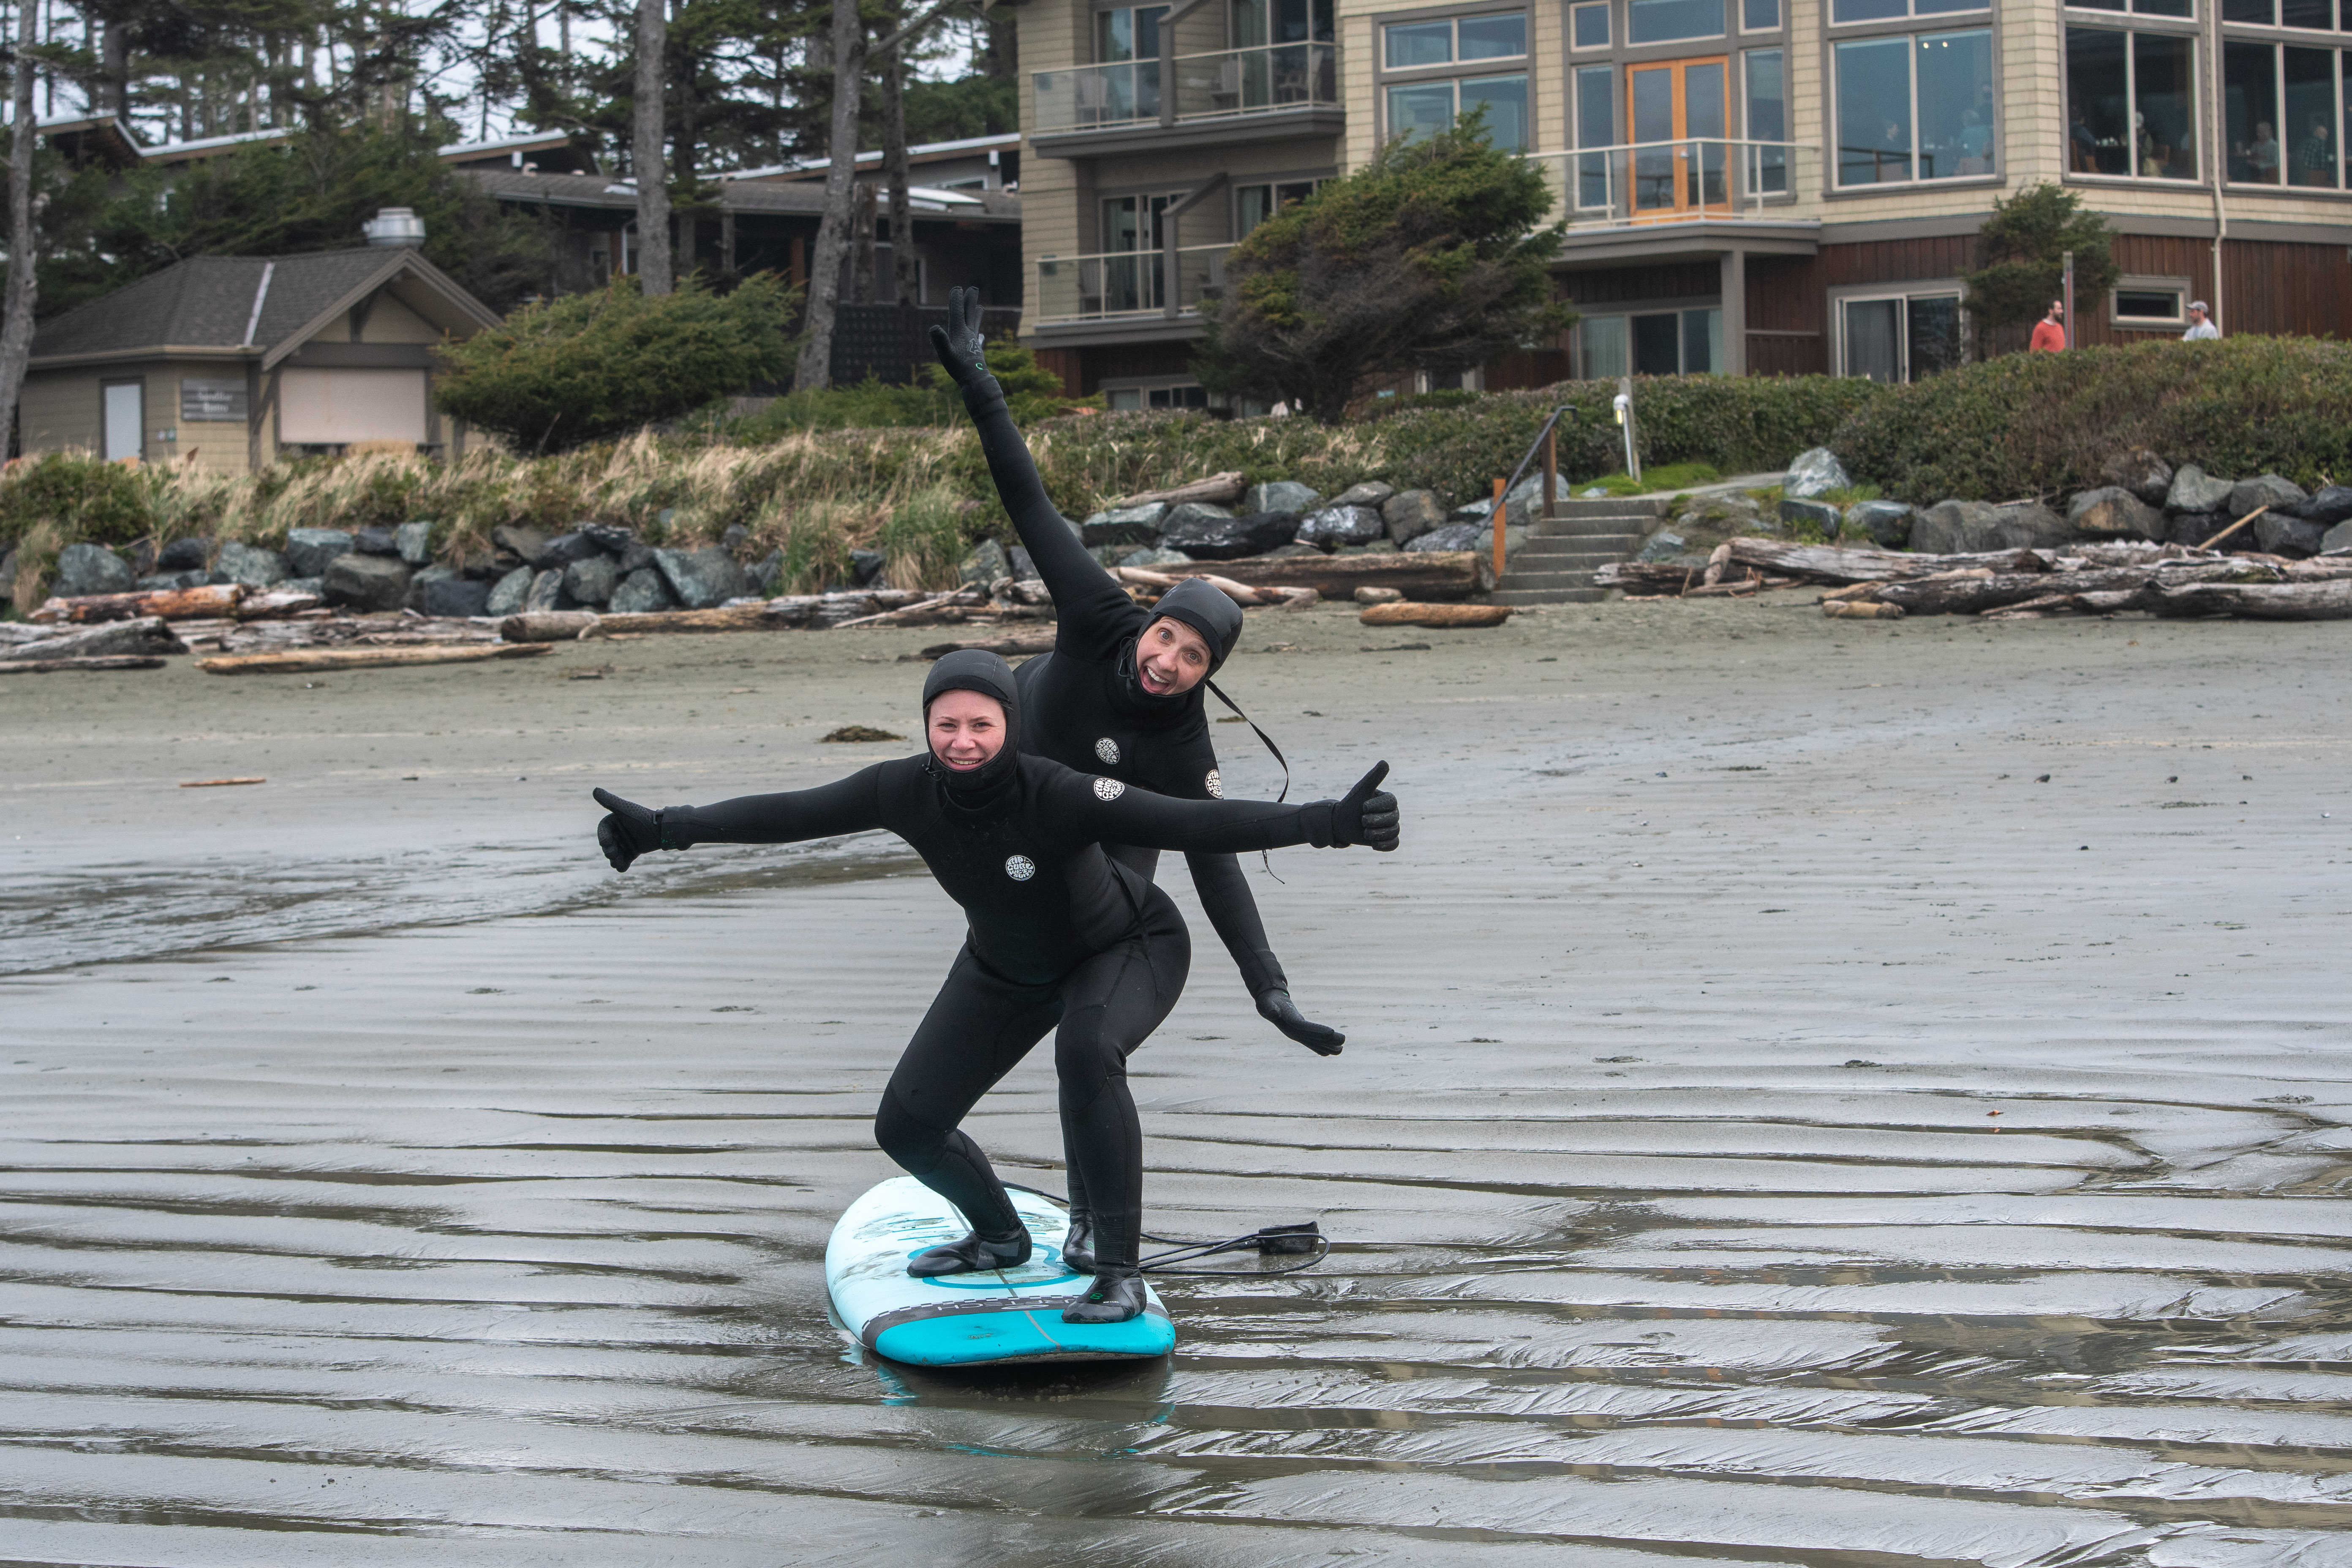 2 women wearing wetsuits and standing on a surf board on the beach acting silly